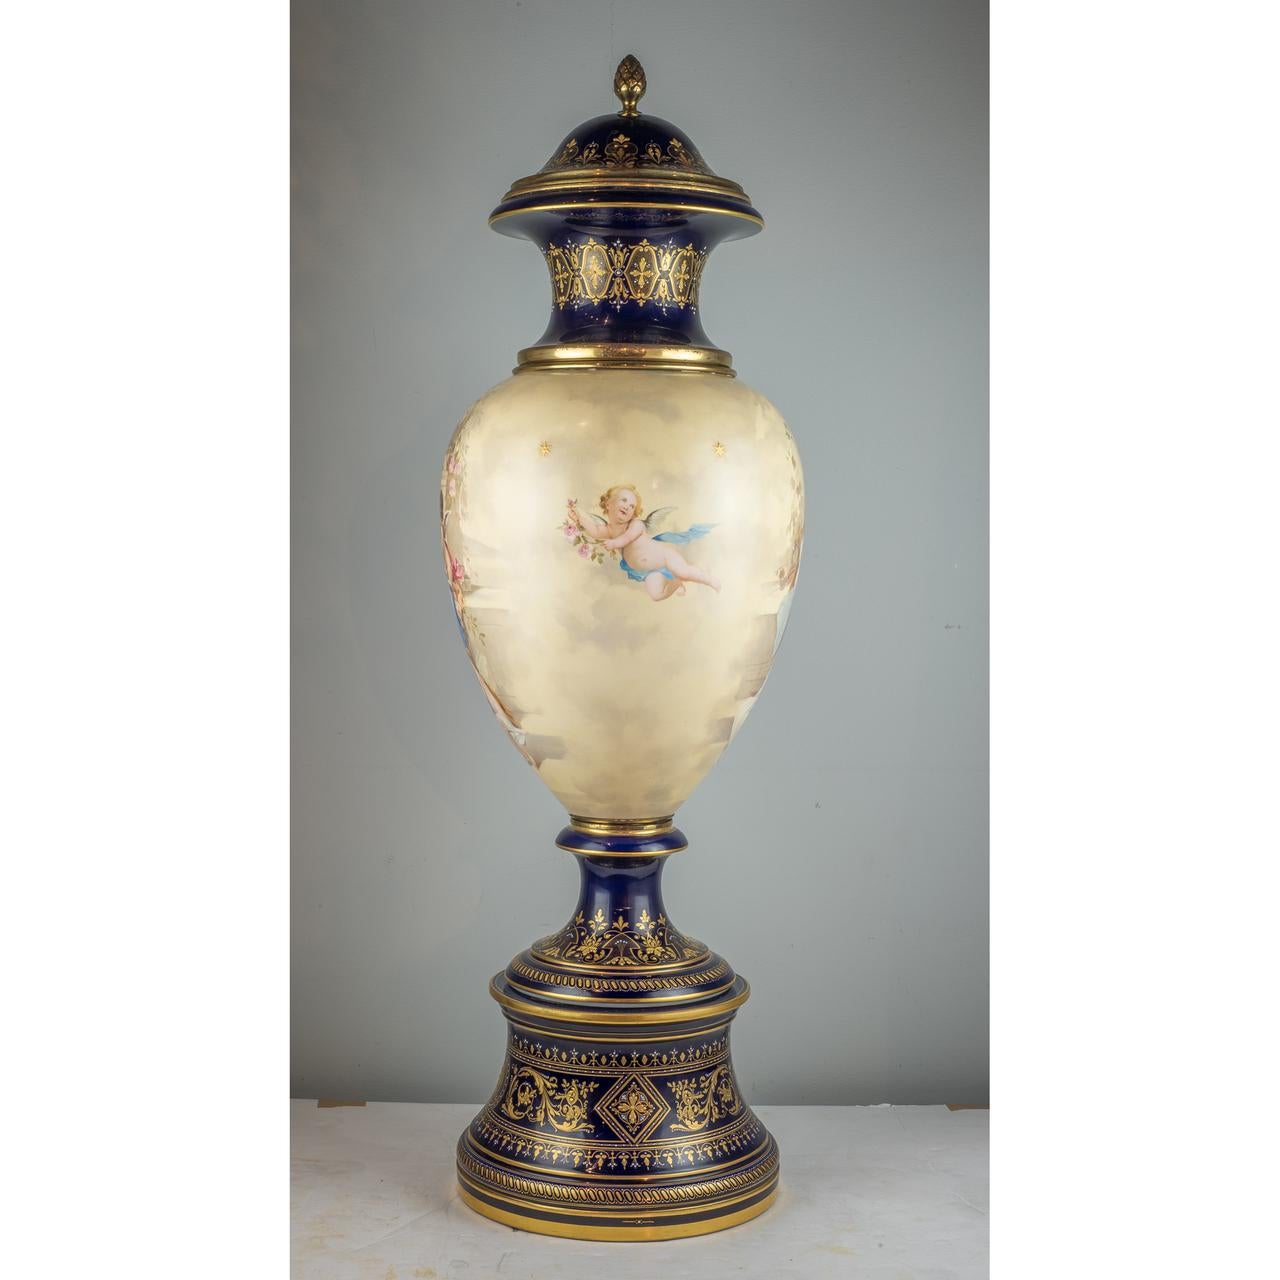 Gilt Stunning Large Royal Vienna-Style Painted Porcelain Covered Urns For Sale